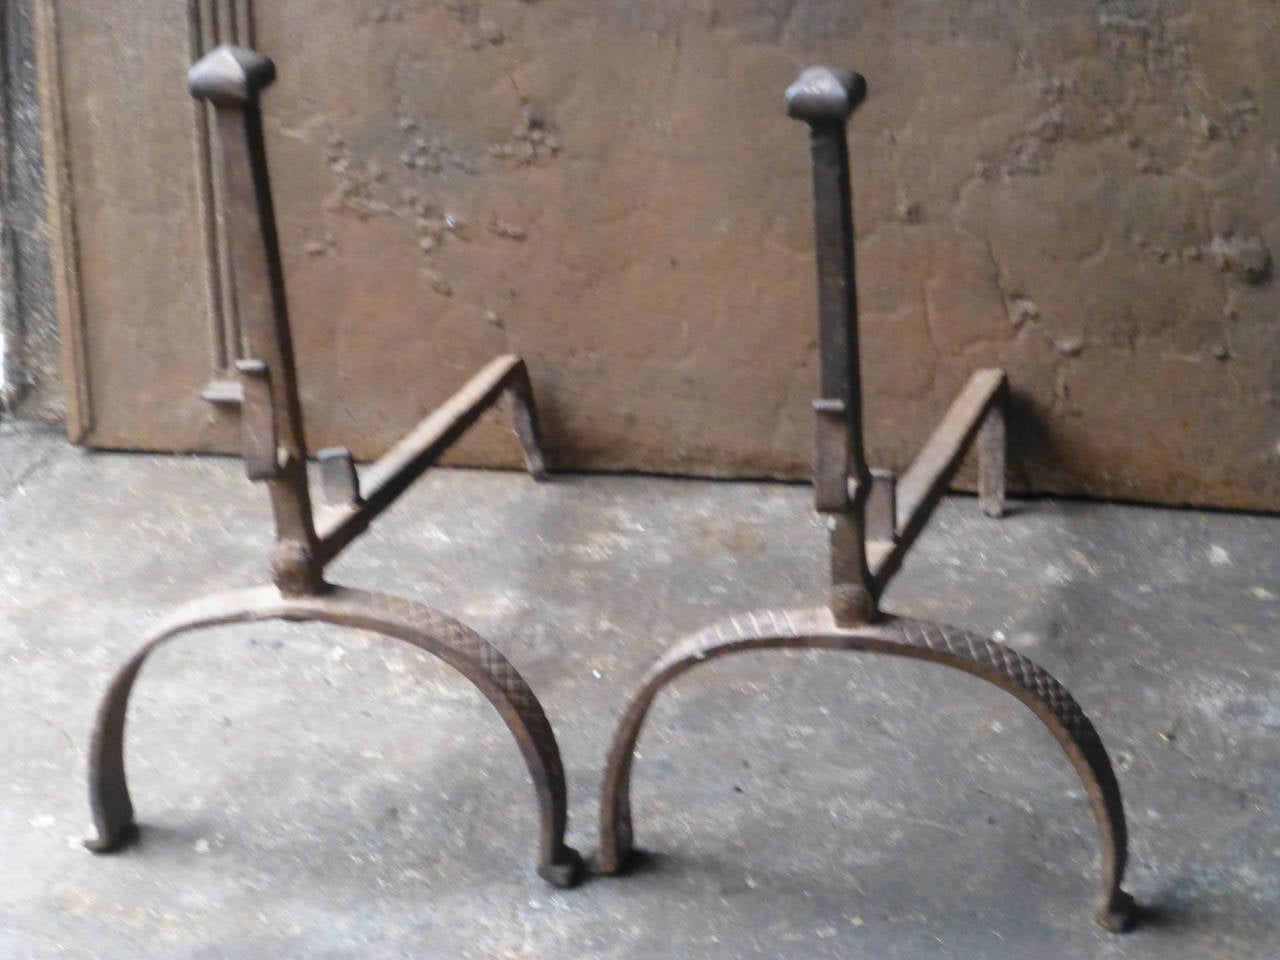 Wrought iron fire dogs with spit hooks.

We have a unique and specialized collection of antique and used fireplace accessories consisting of more than 1000 listings at 1stdibs. Amongst others, we always have 300+ firebacks, 250+ pairs of andirons